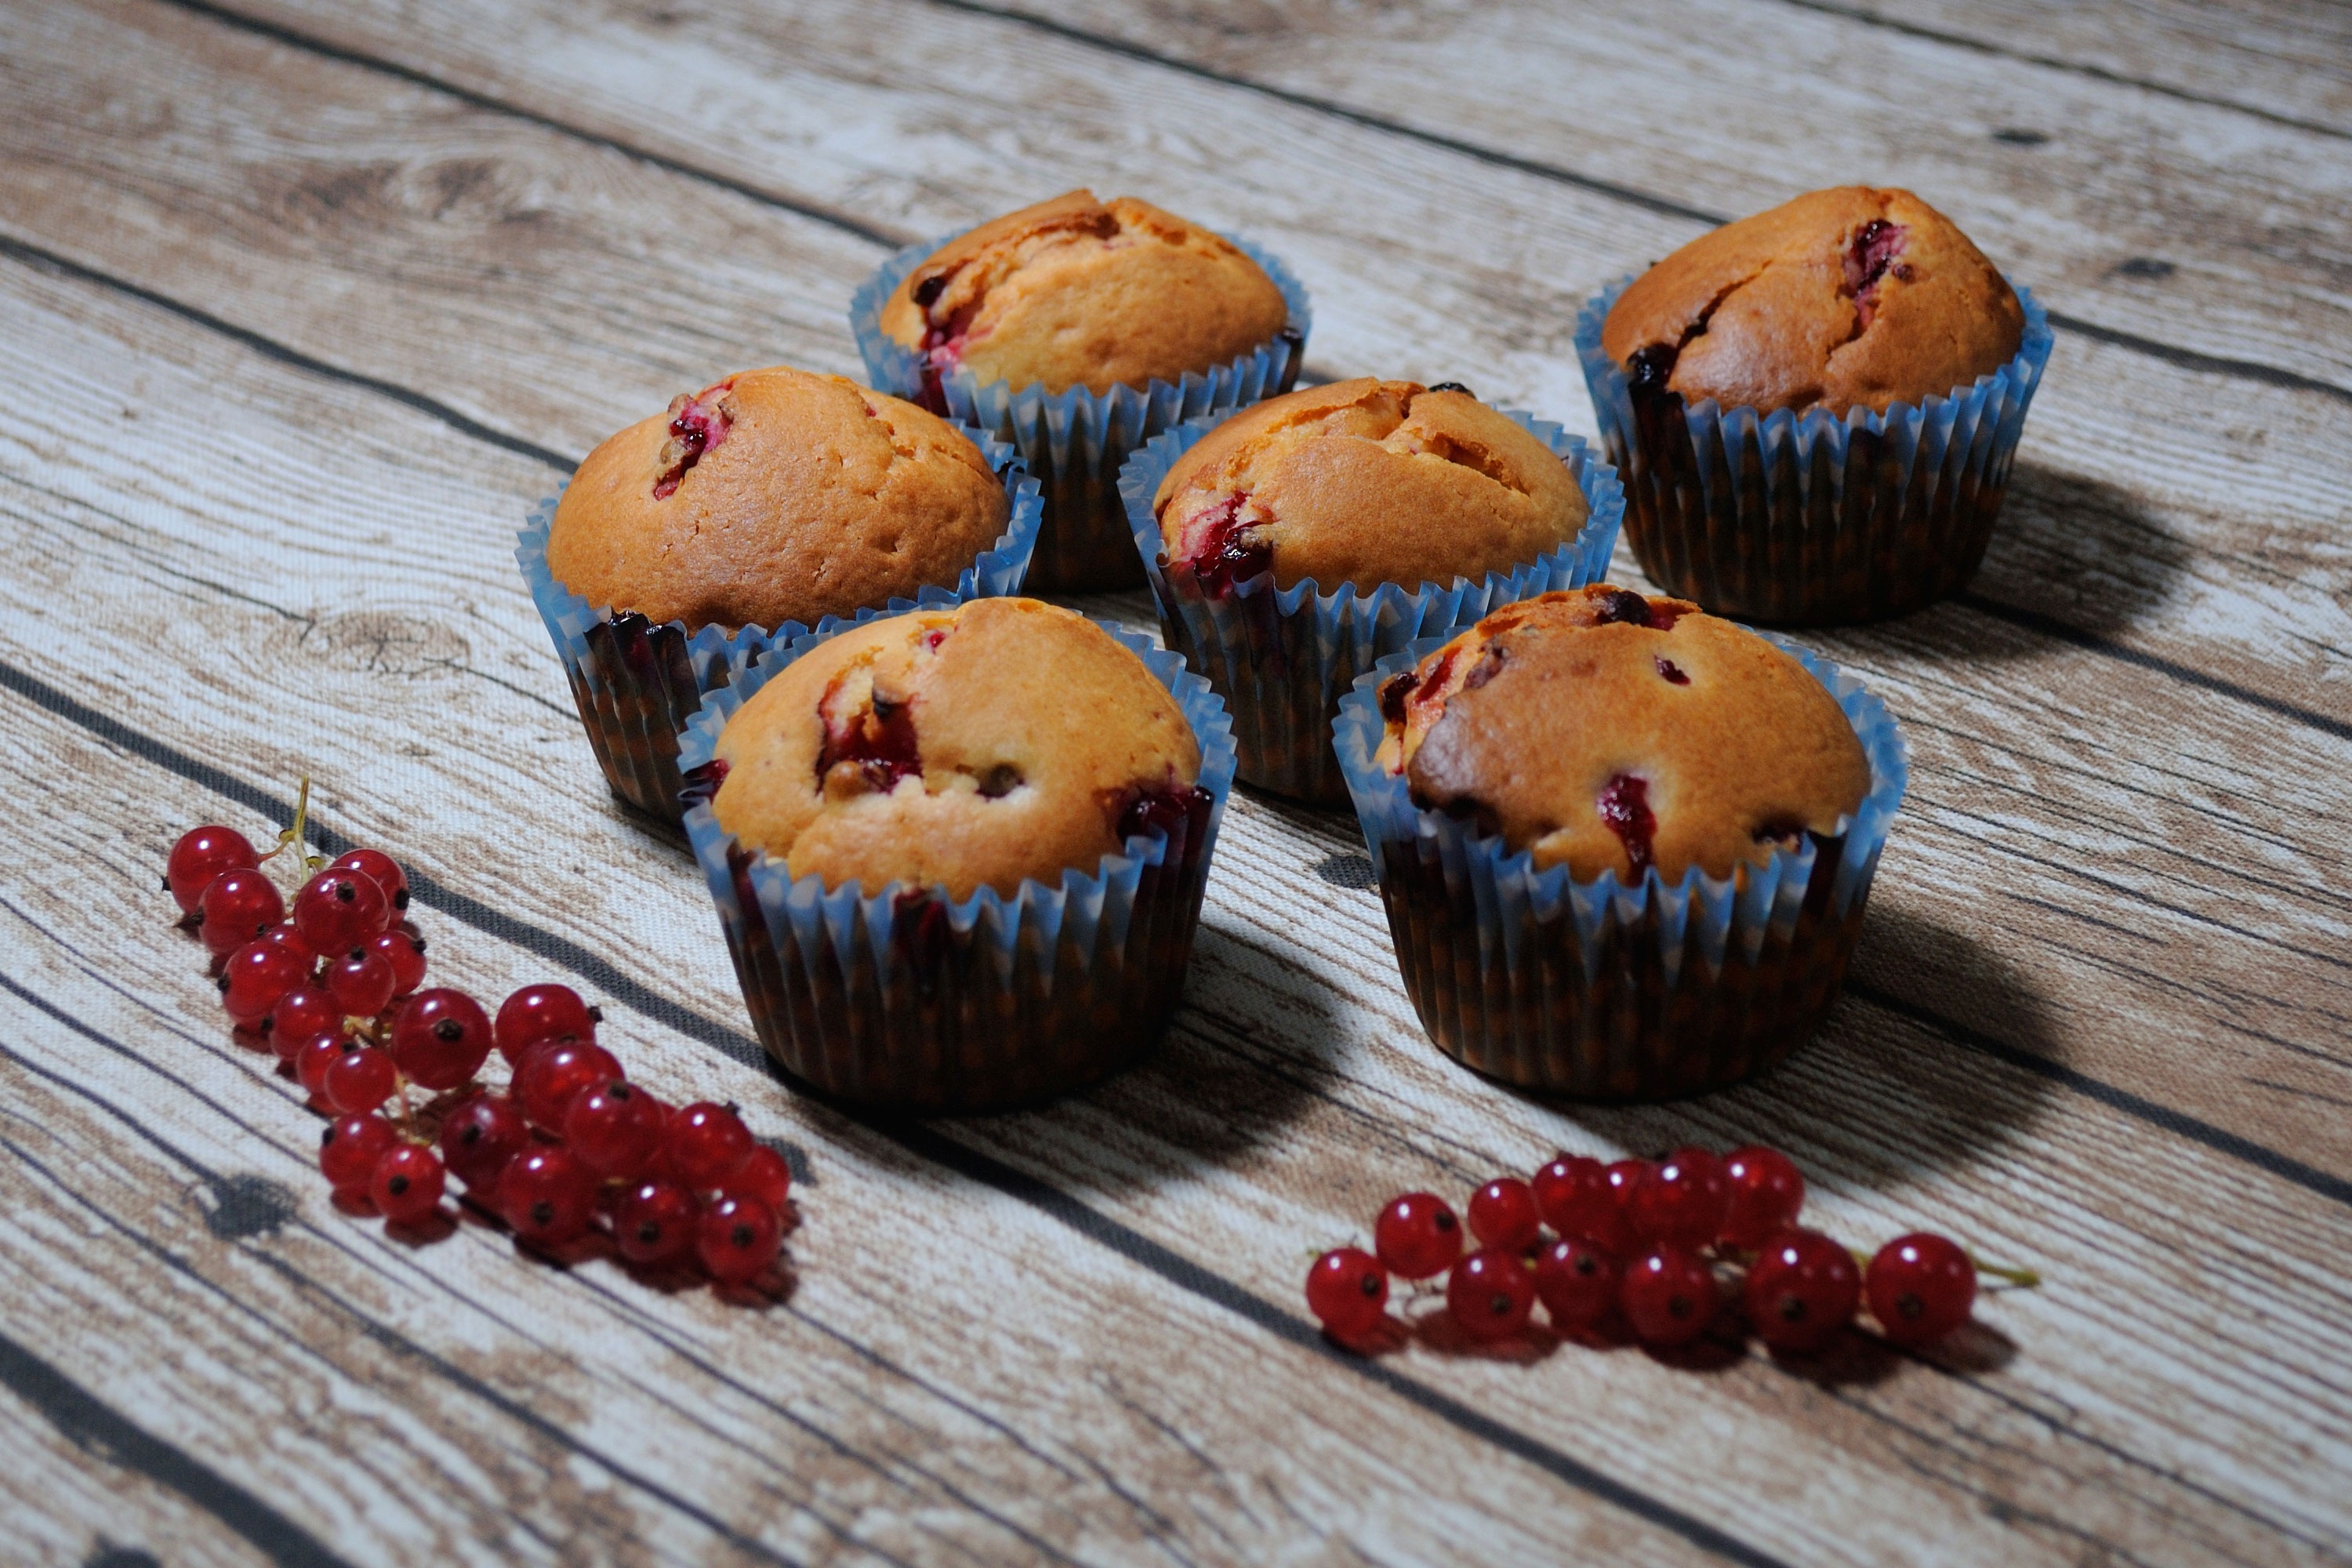 Muffin Pastry Dessert Currants 3000x2000